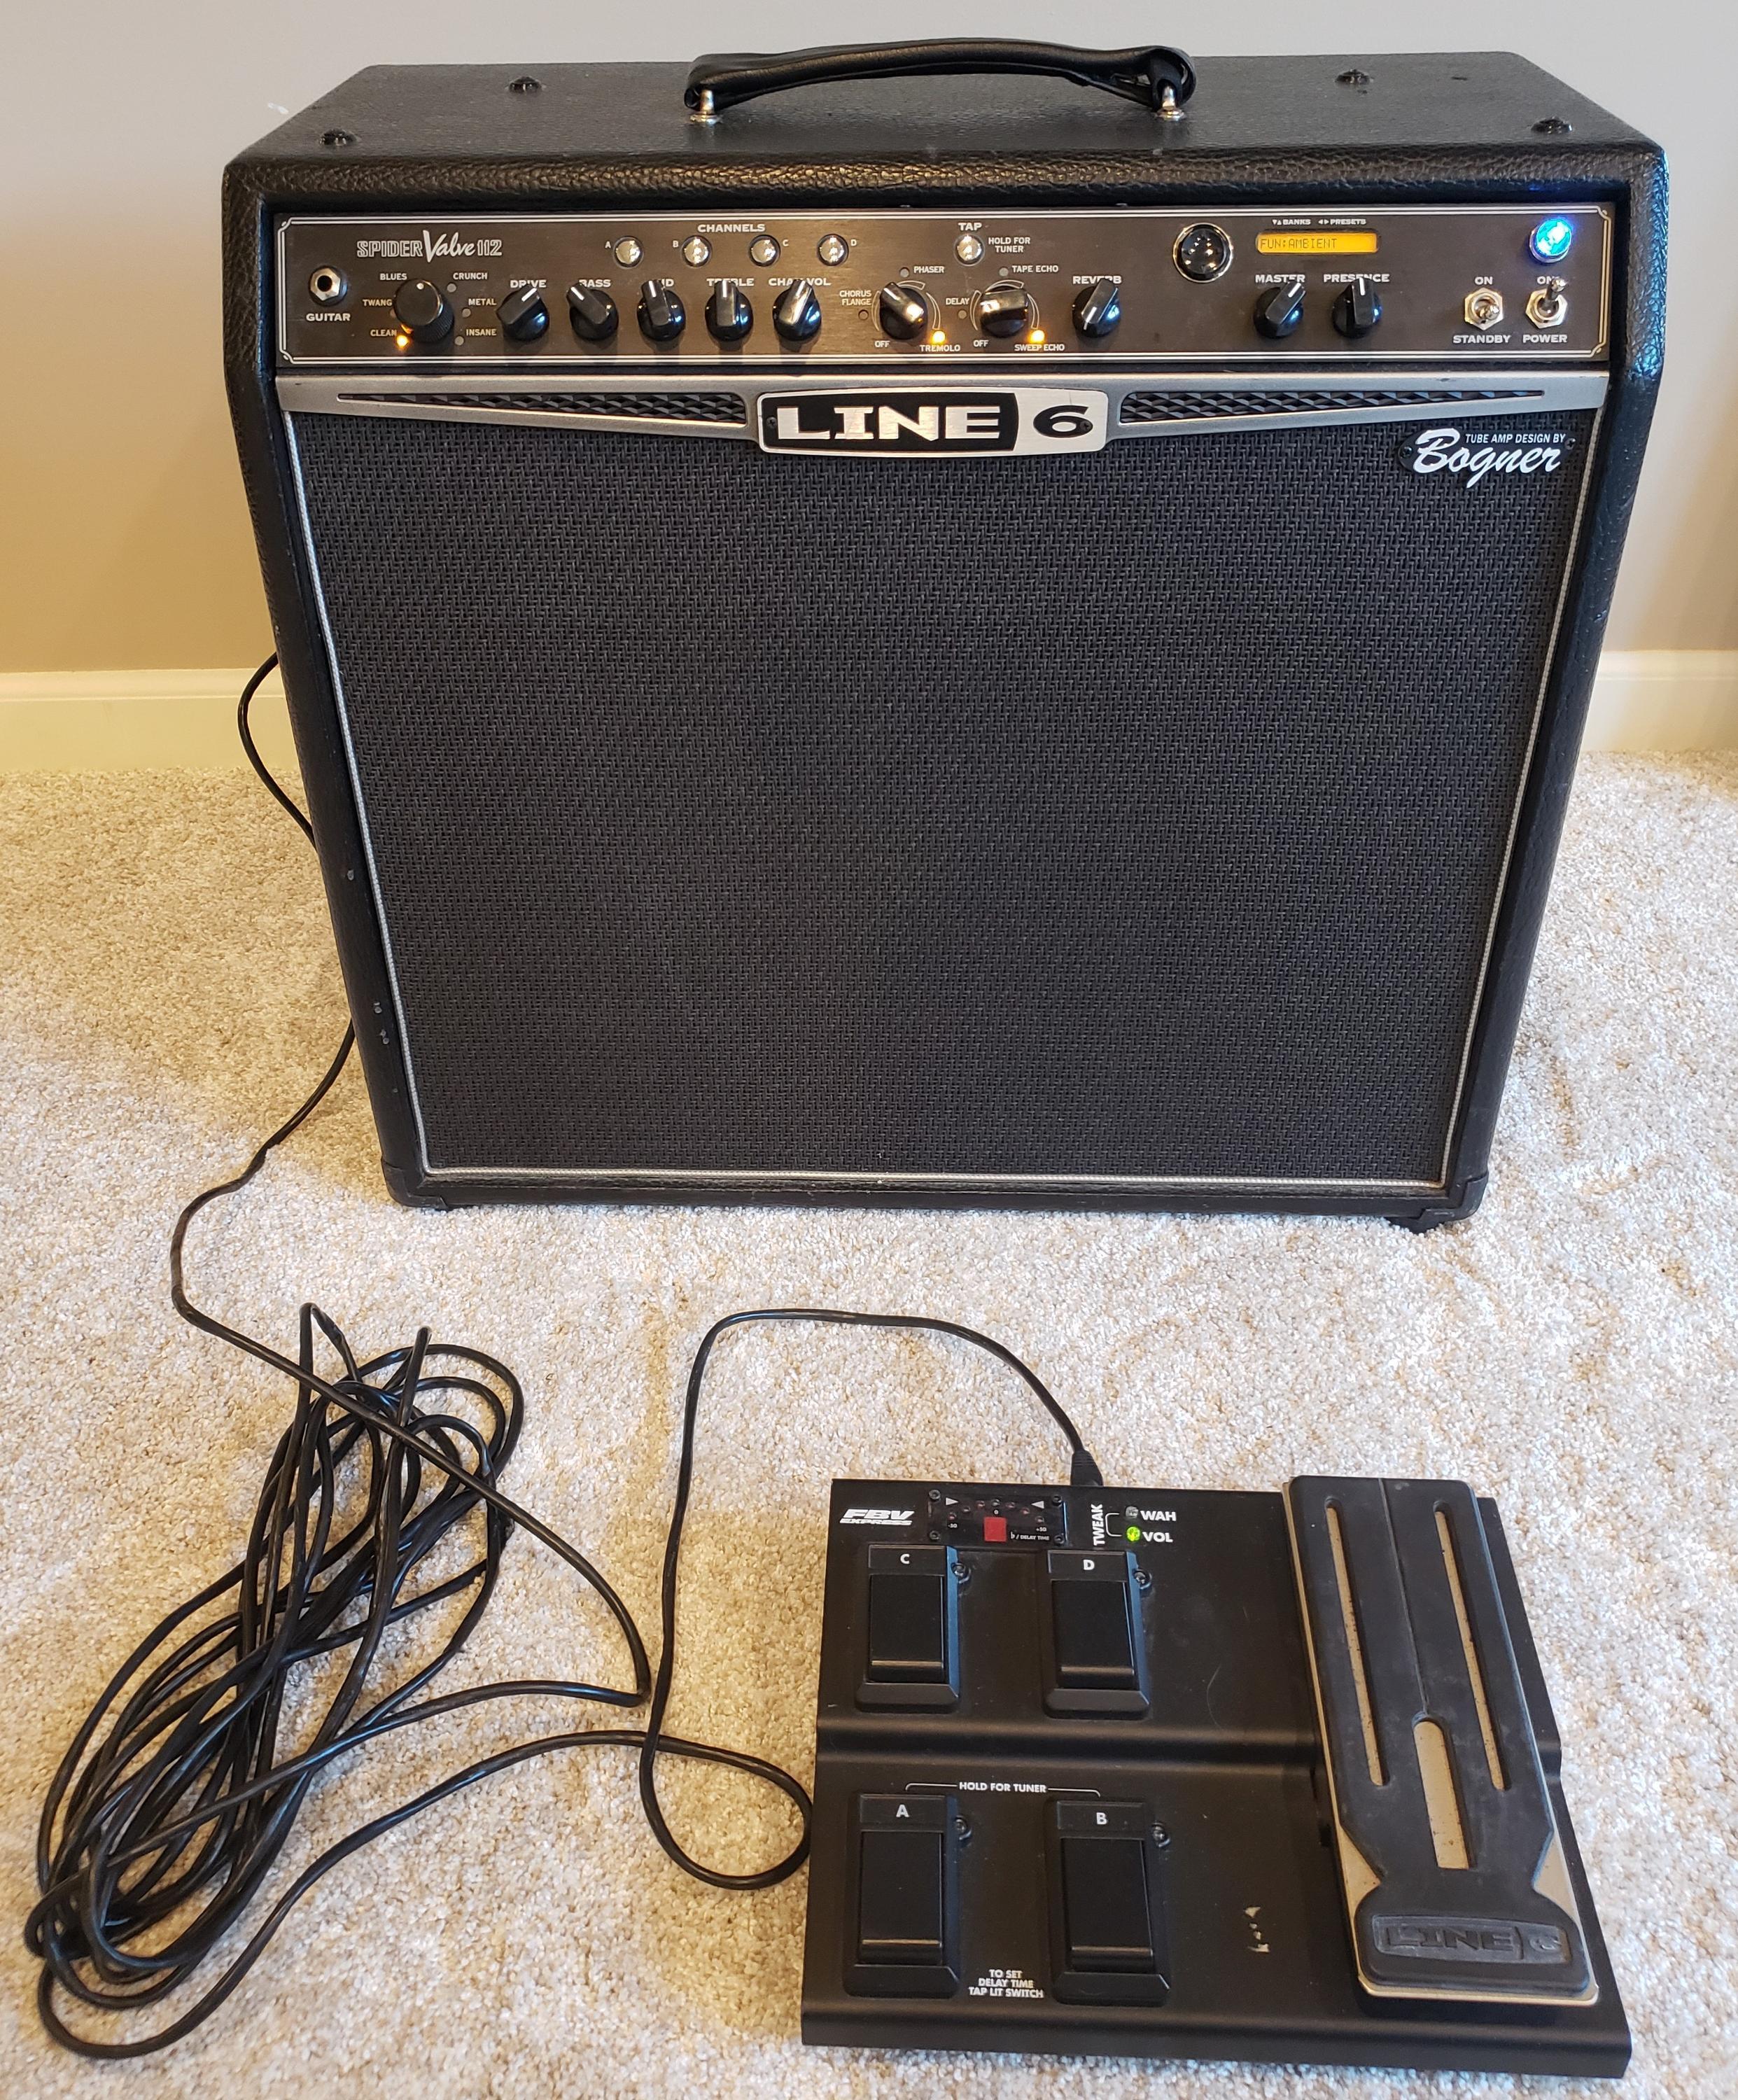 Used Line 6 40W Tube amplifier with foot control - Line 6 Spider Valve 112